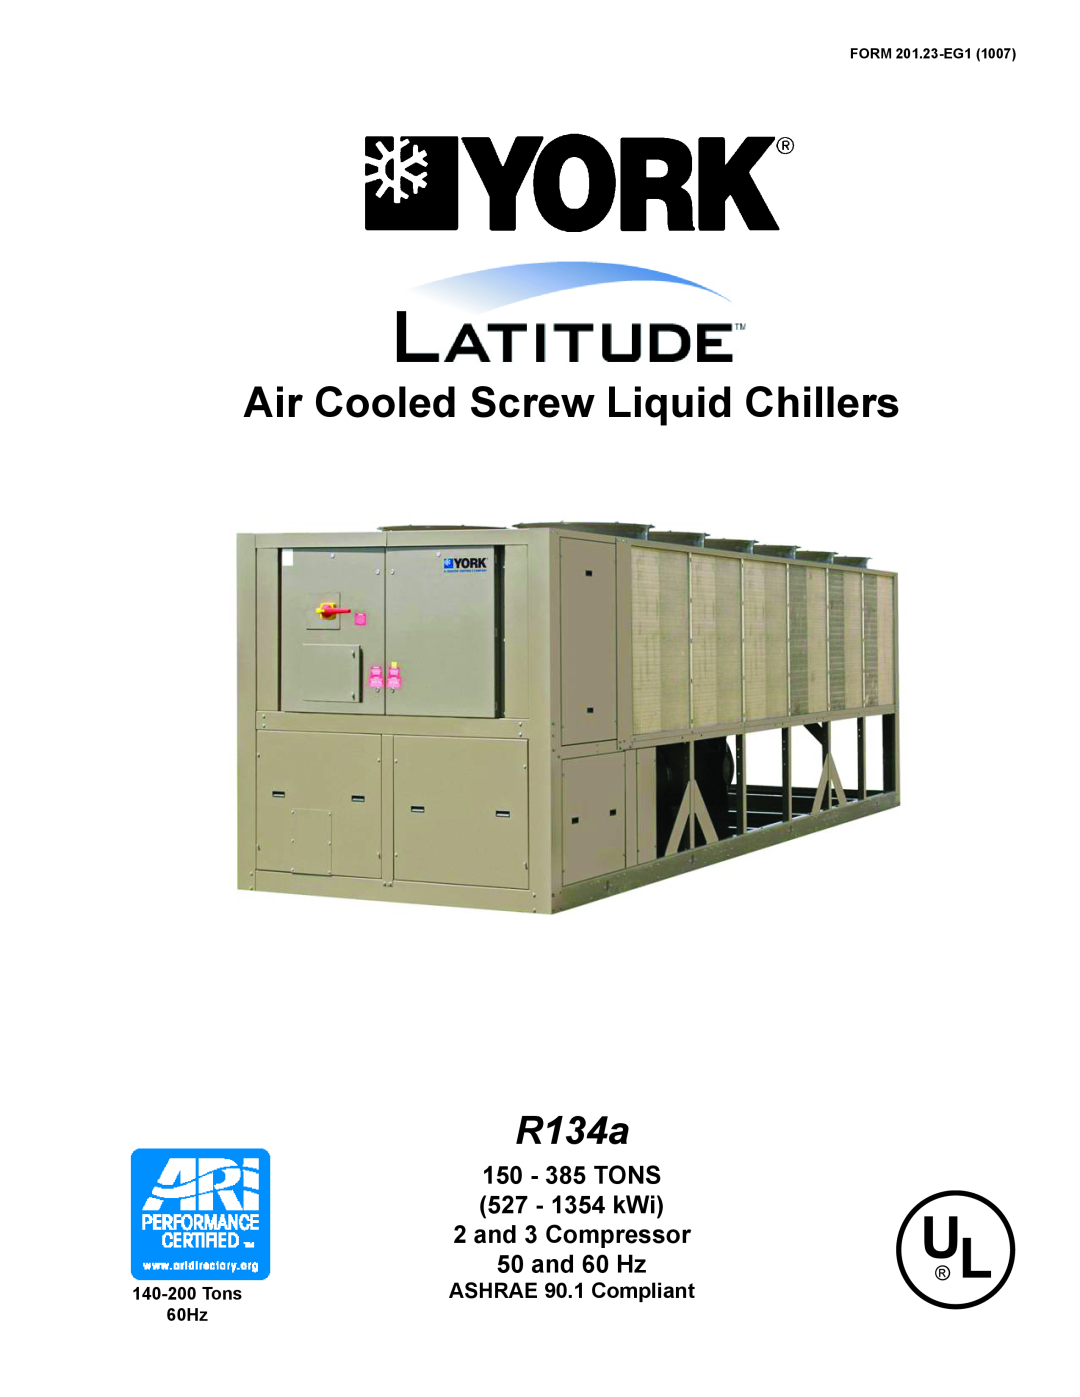 York R134A manual 150 - 385 TONS, 527 - 1354 kWi, and 3 Compressor, and 60 Hz, ASHRAE 90.1 Compliant, R134a 